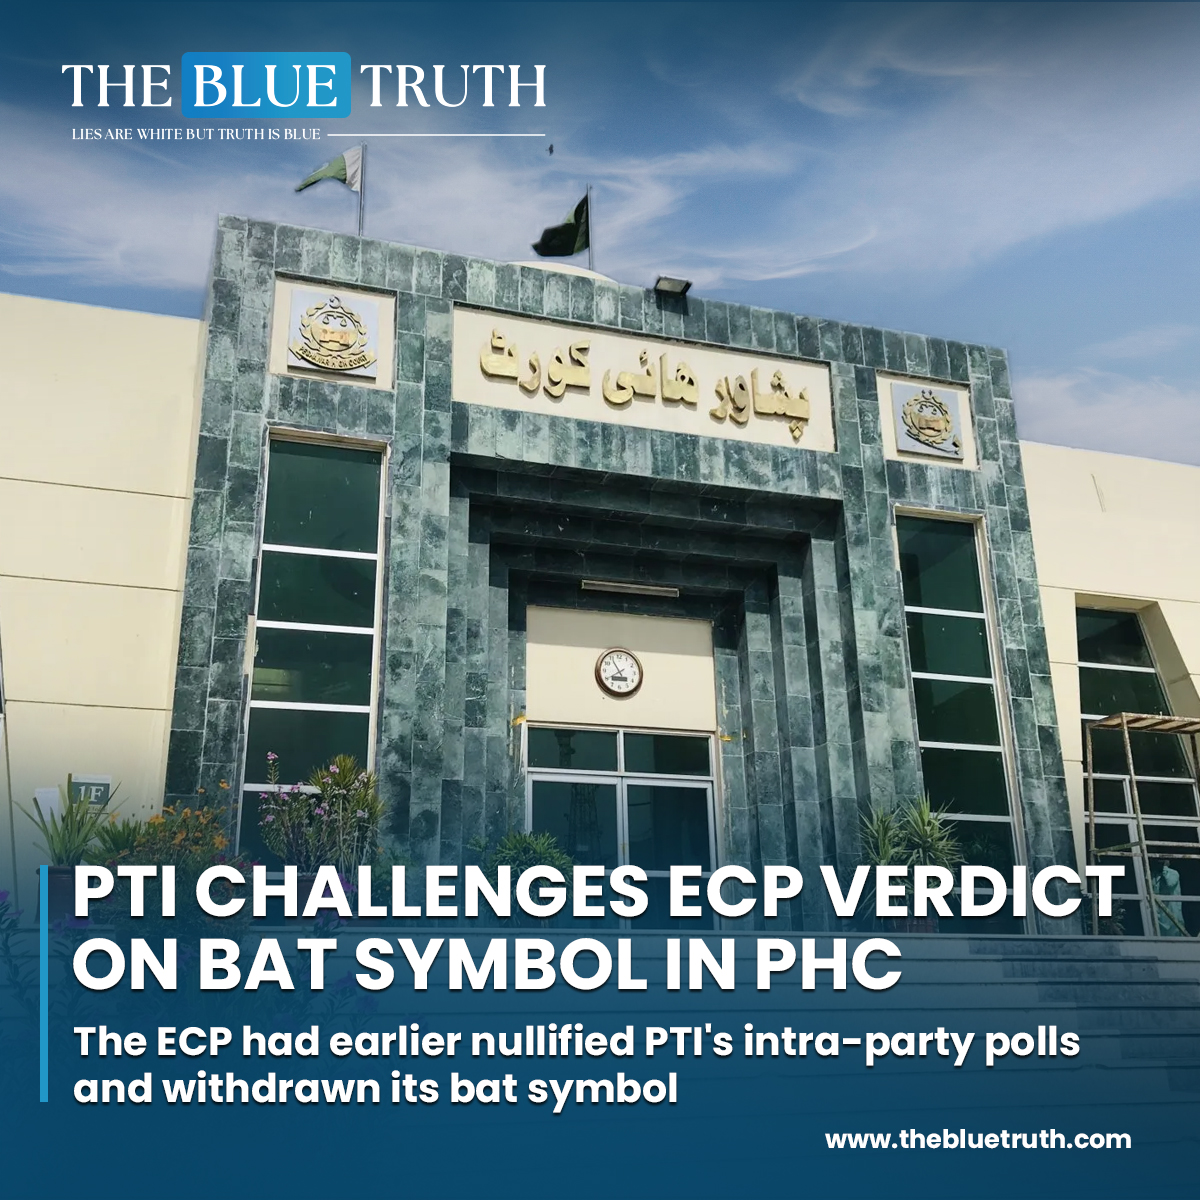 PTI challenges ECP verdict on bat symbol in PHC.
The ECP had earlier nullified PTI's intra-party polls and withdrawn its bat symbol.

#PTI #IntraPartyElections #ECPDecision #LegalChallenge #BatSymbol #PeshawarHighCourt #BarristerGoharKhan #tbt #TheBlueTruth